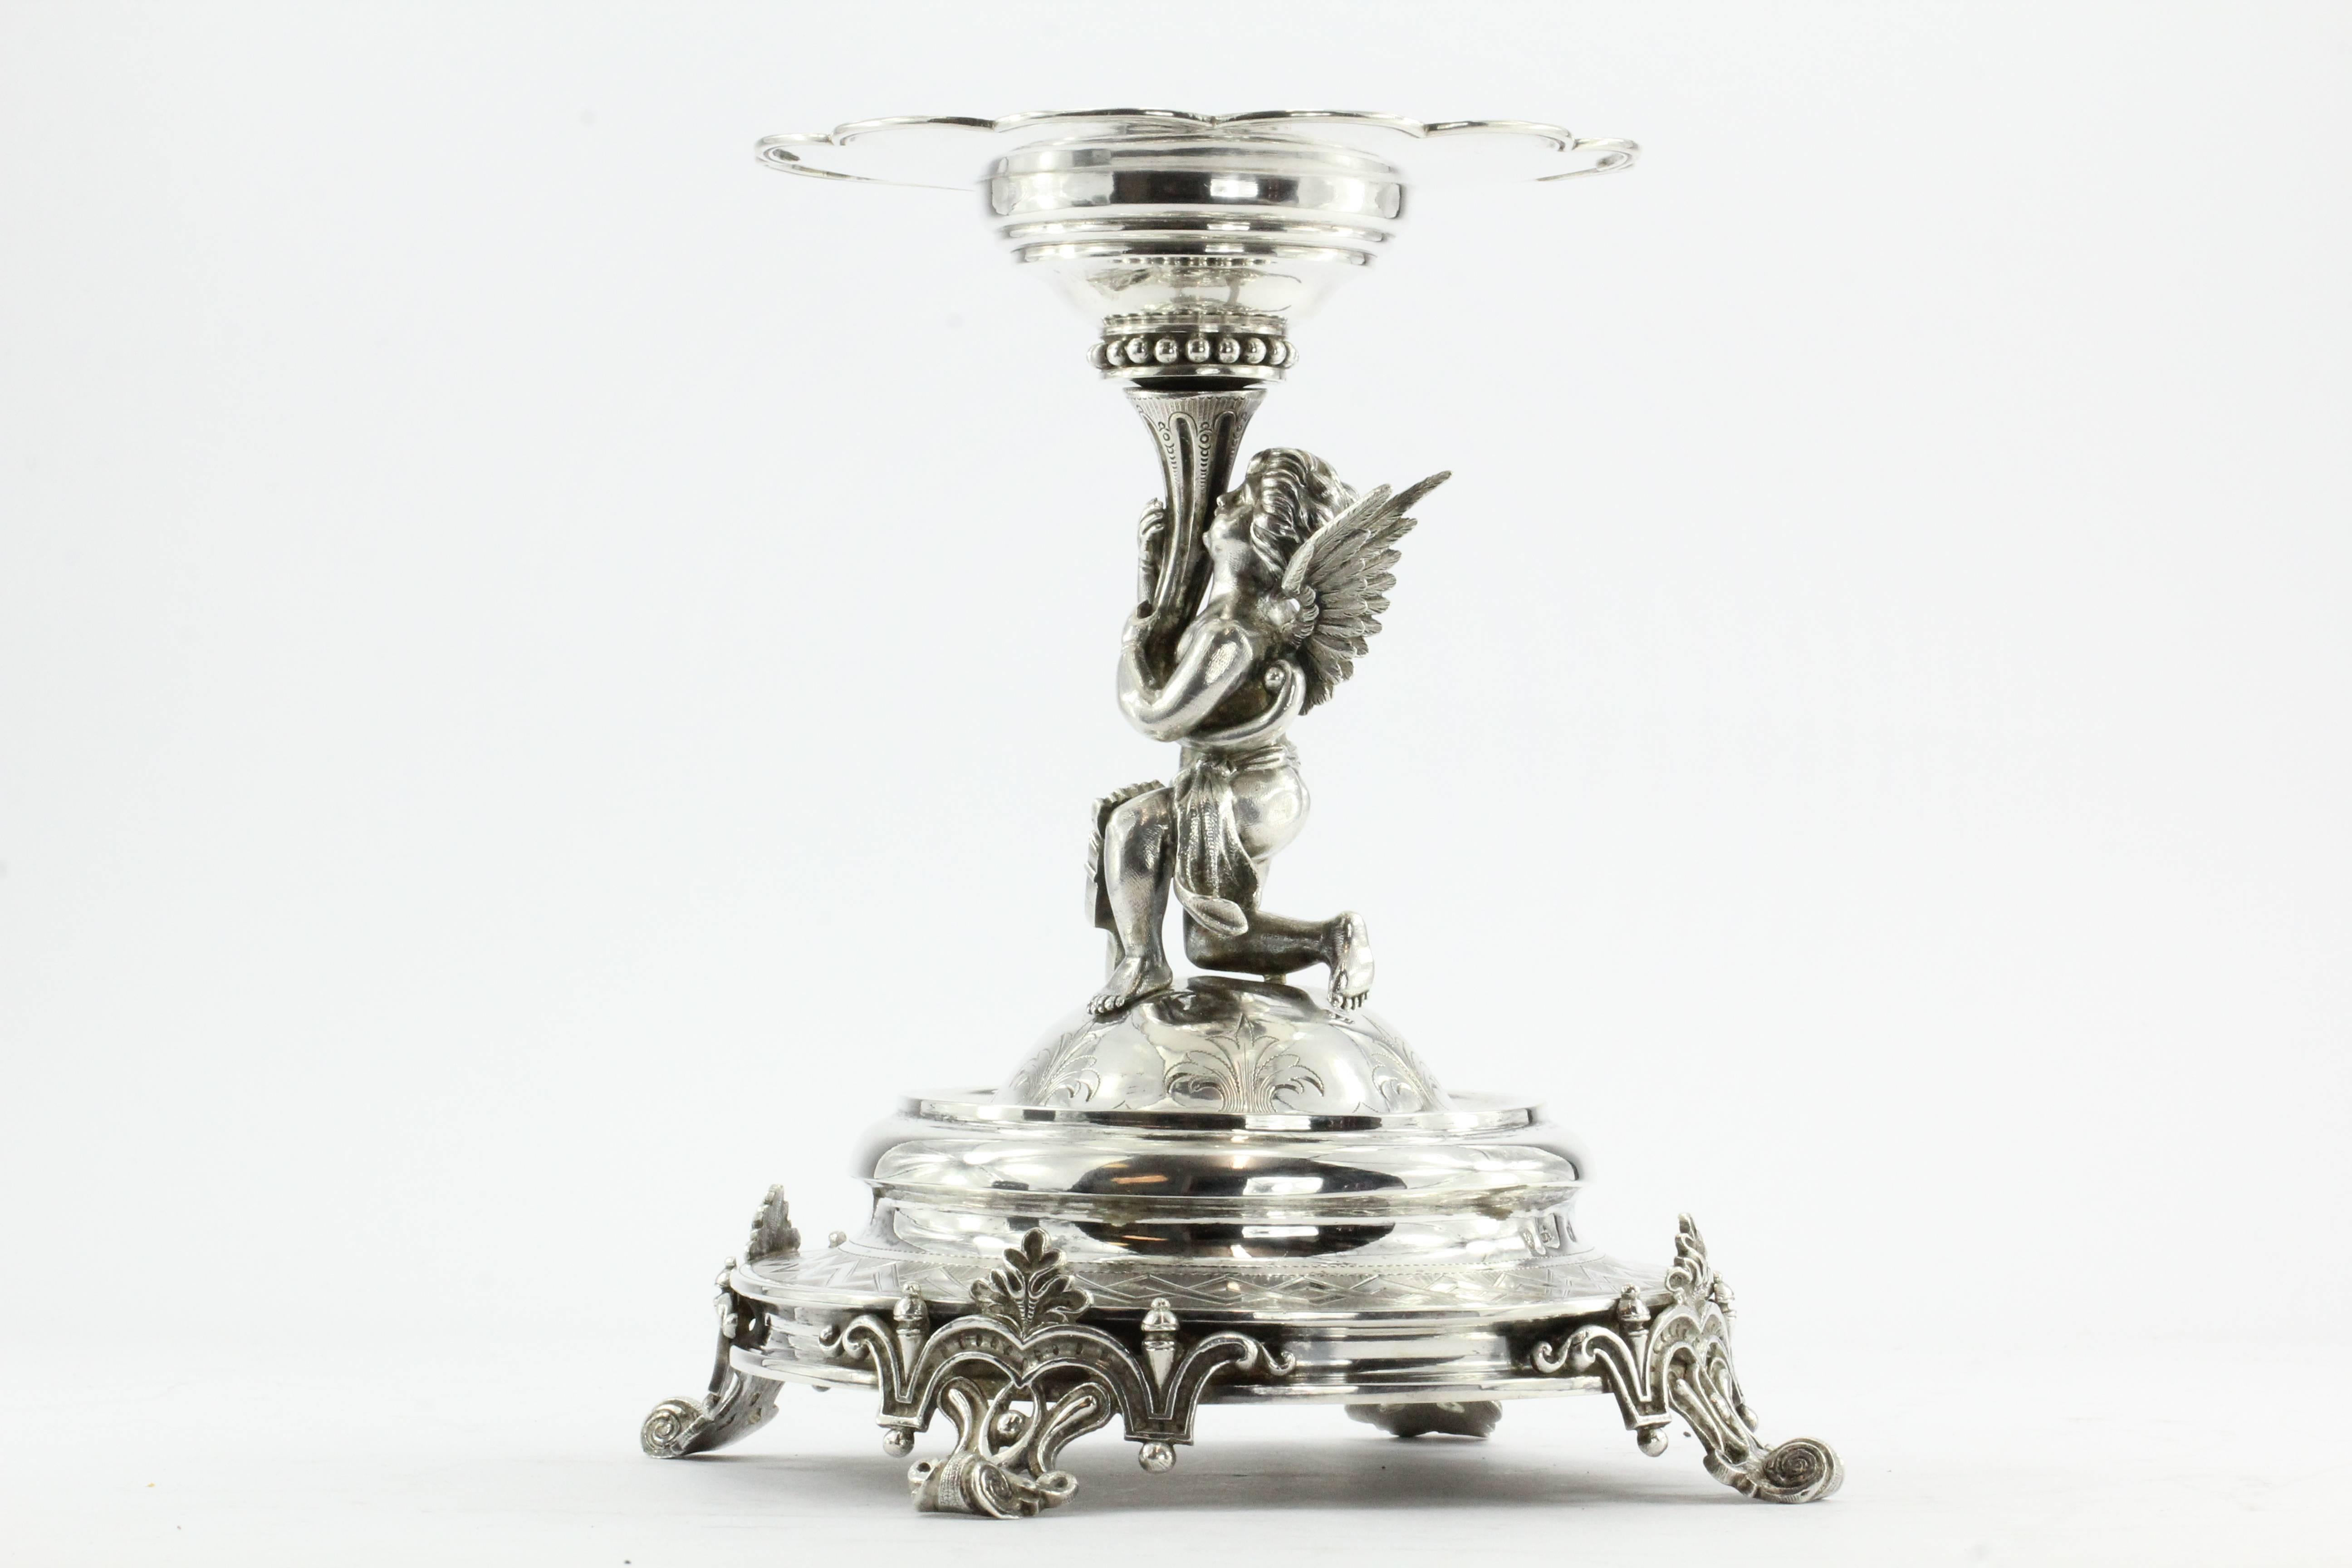 Antique Austrian imperial 800 silver figural cupid cherub angel tazza compote. The piece is in great estate condition and ready to use. There is a deep scratch the underside of the tray though. Please see pictures for details. The piece is very much